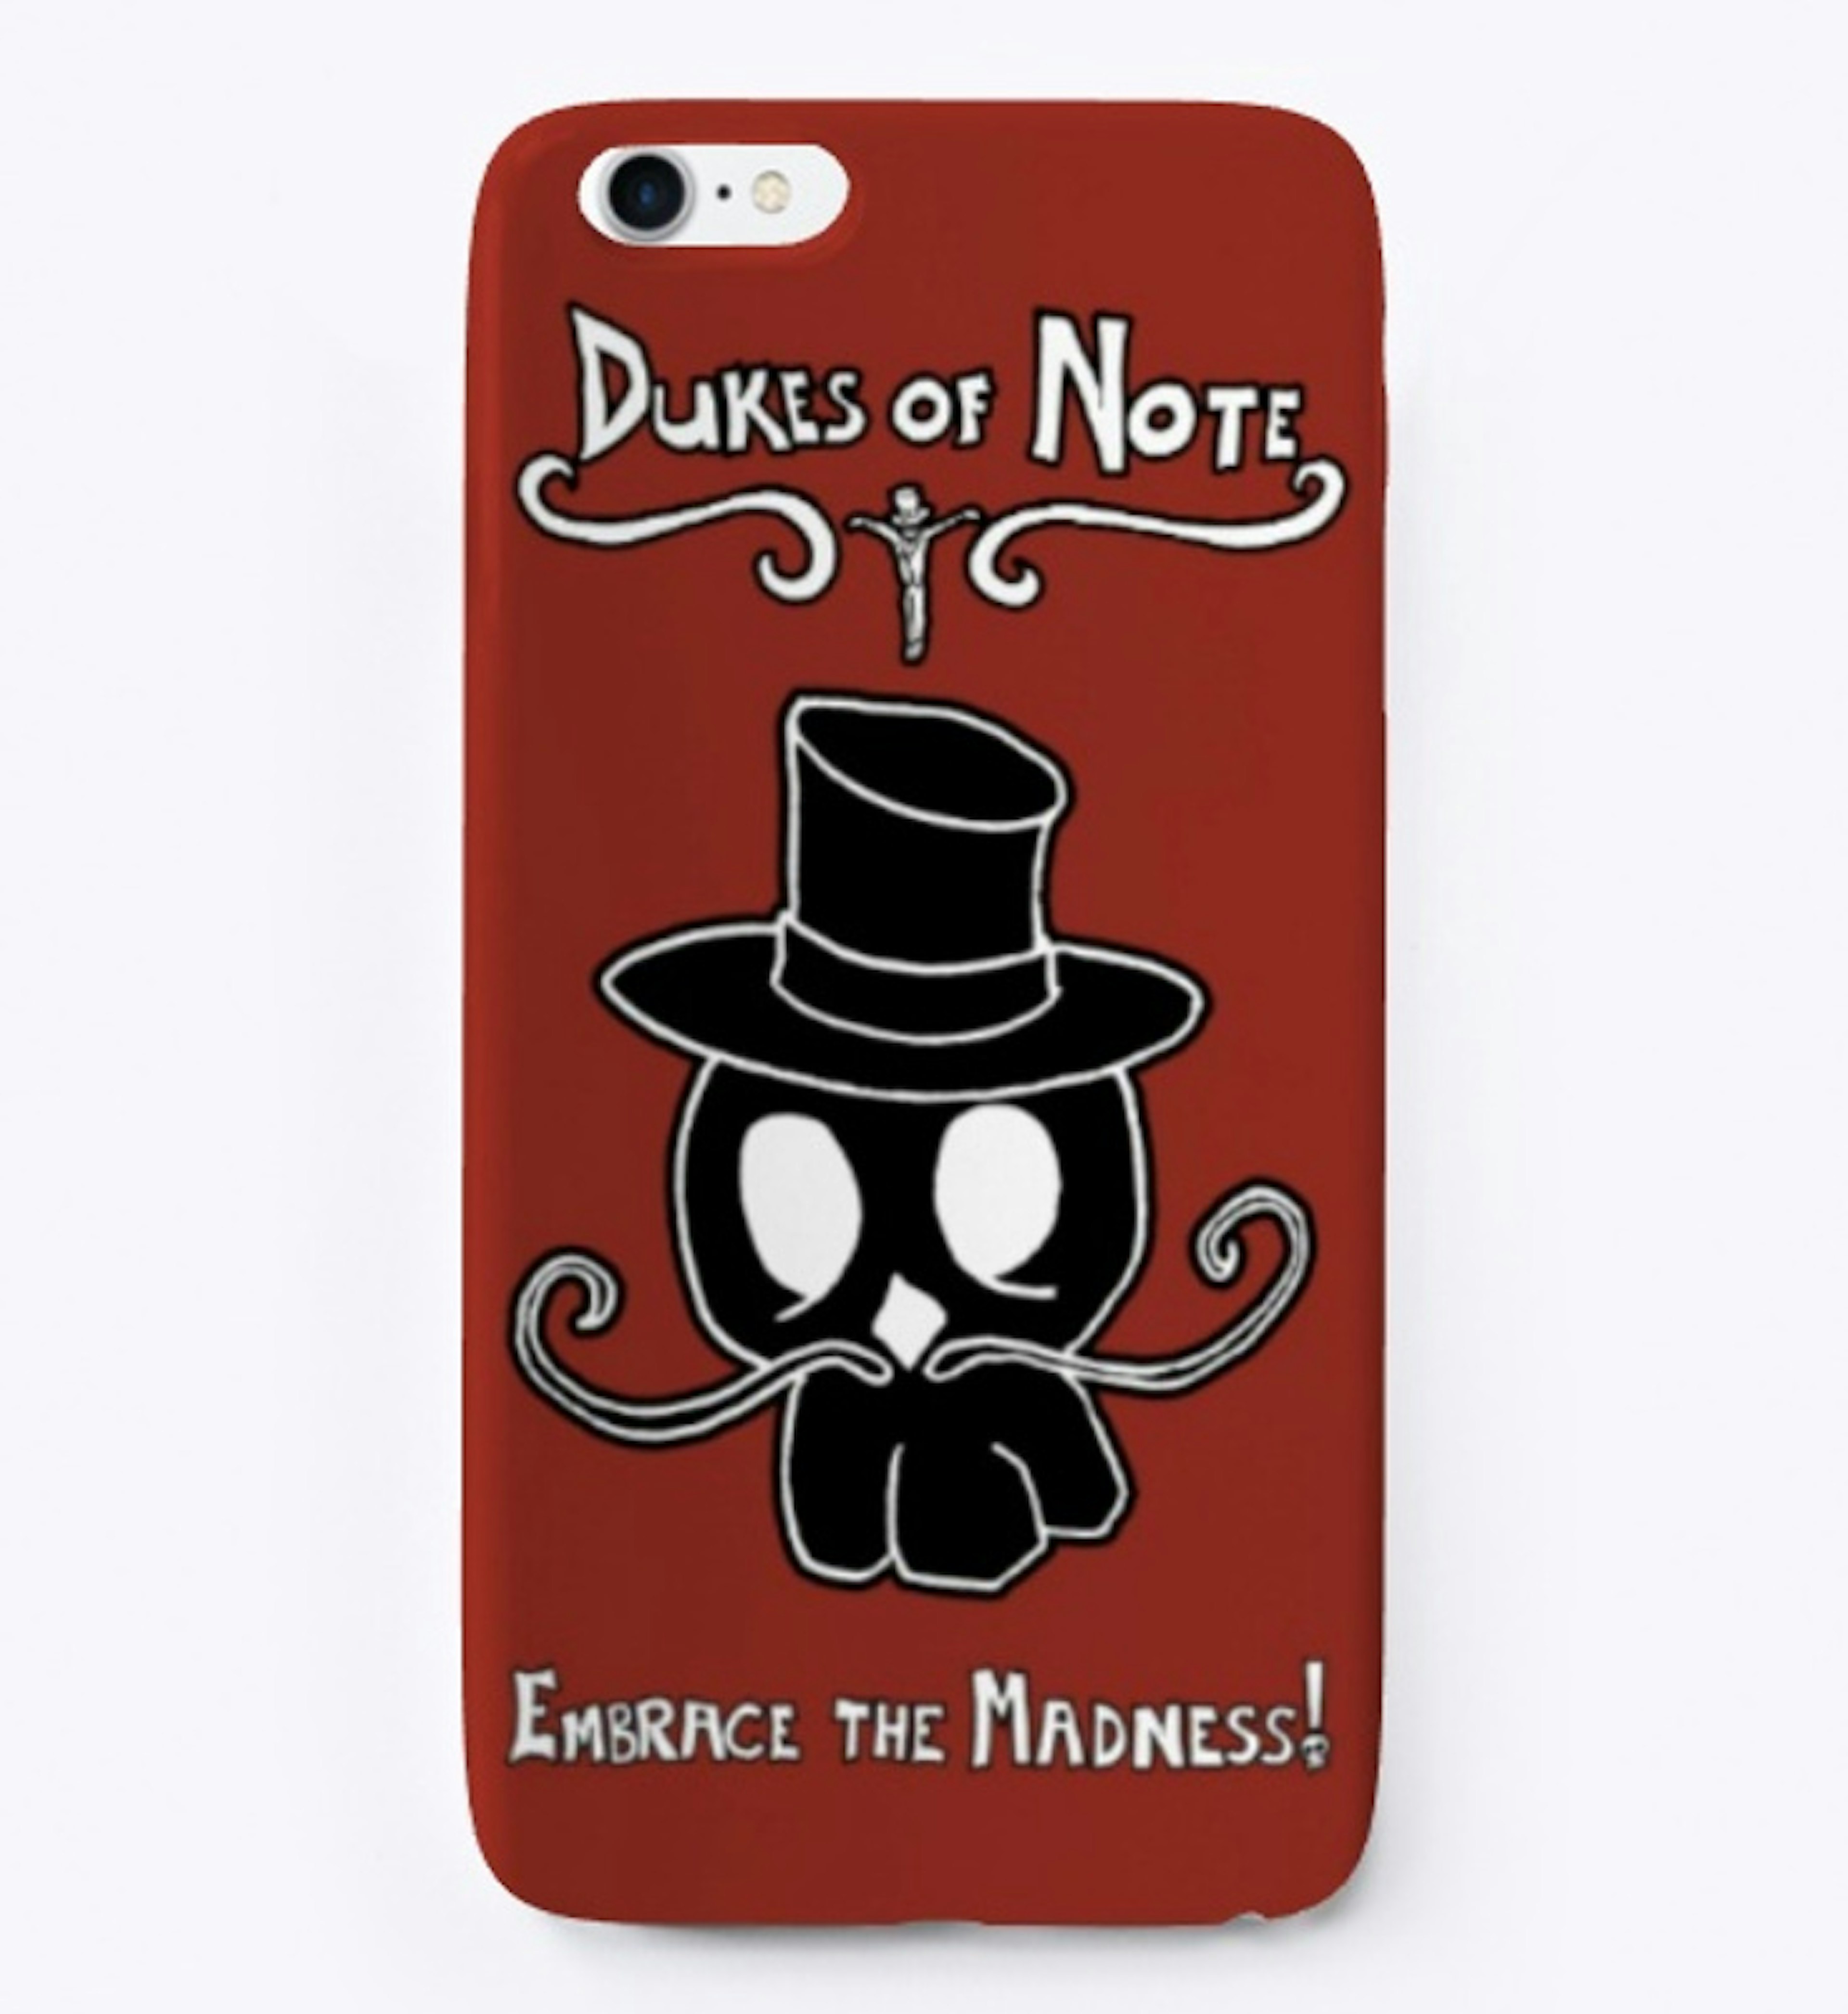 Dukes of Note - iPhone Cover